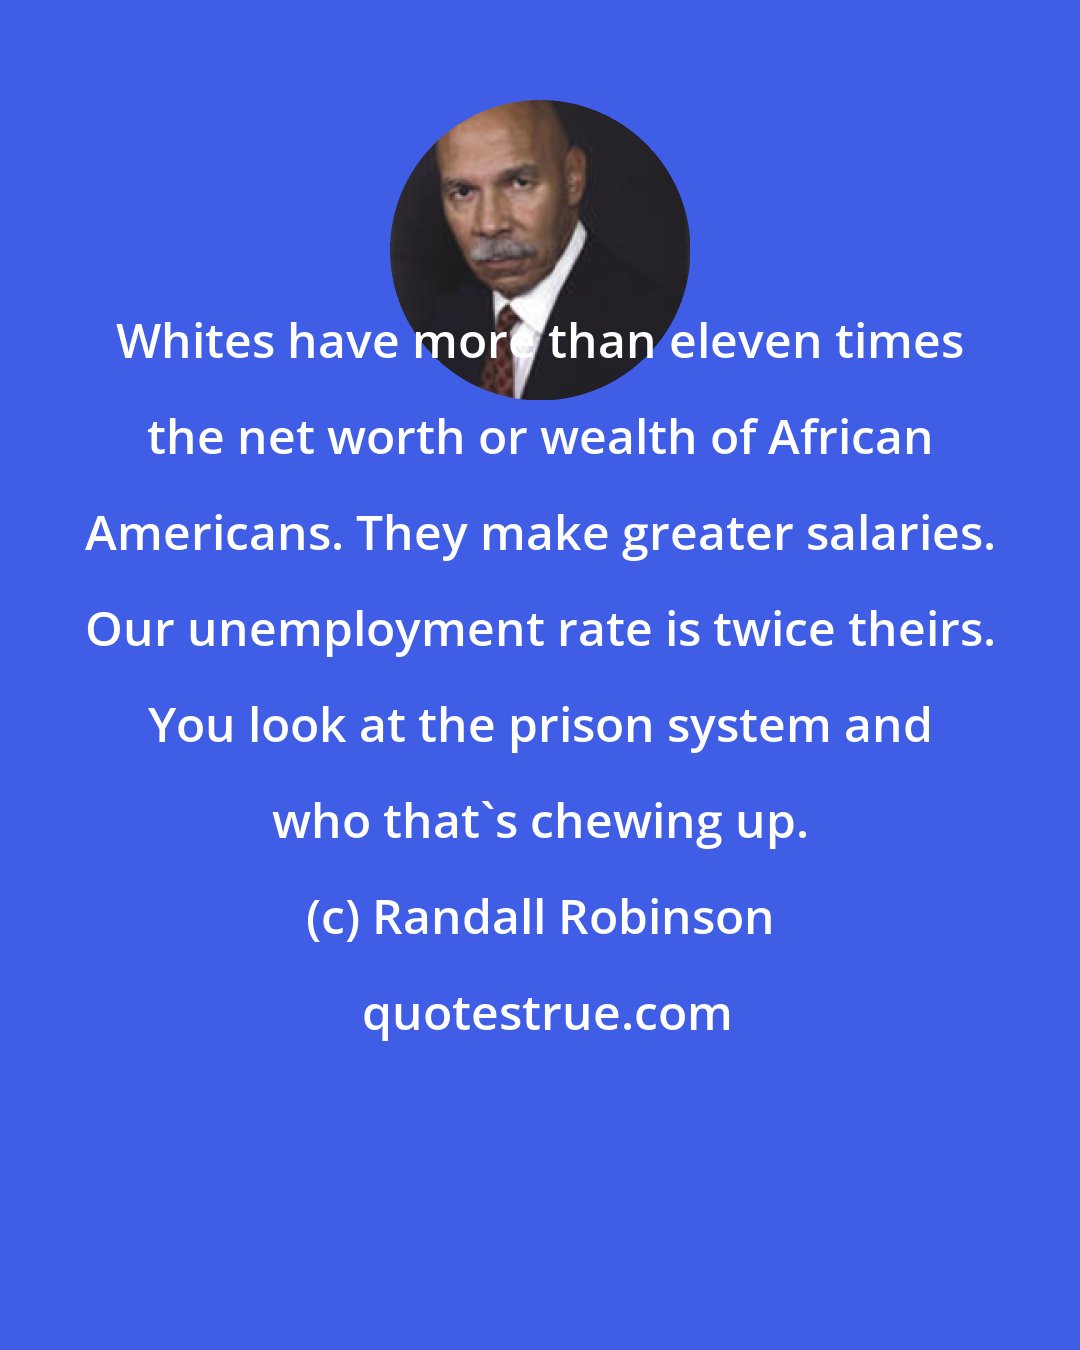 Randall Robinson: Whites have more than eleven times the net worth or wealth of African Americans. They make greater salaries. Our unemployment rate is twice theirs. You look at the prison system and who that's chewing up.